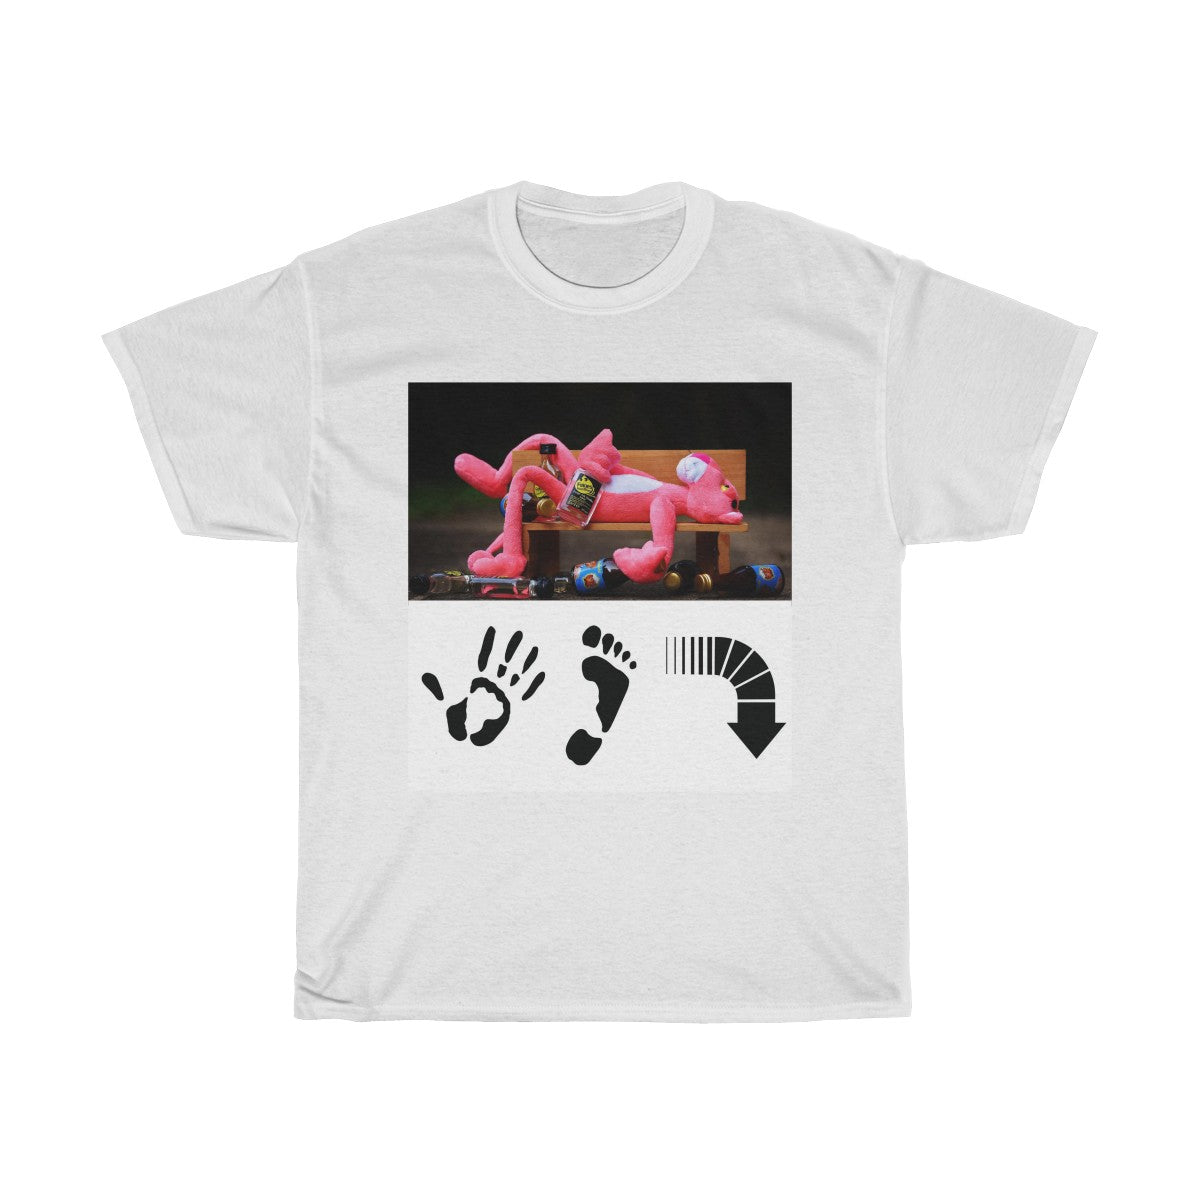 Five Toes Down 2 Bad Day Unisex Tee